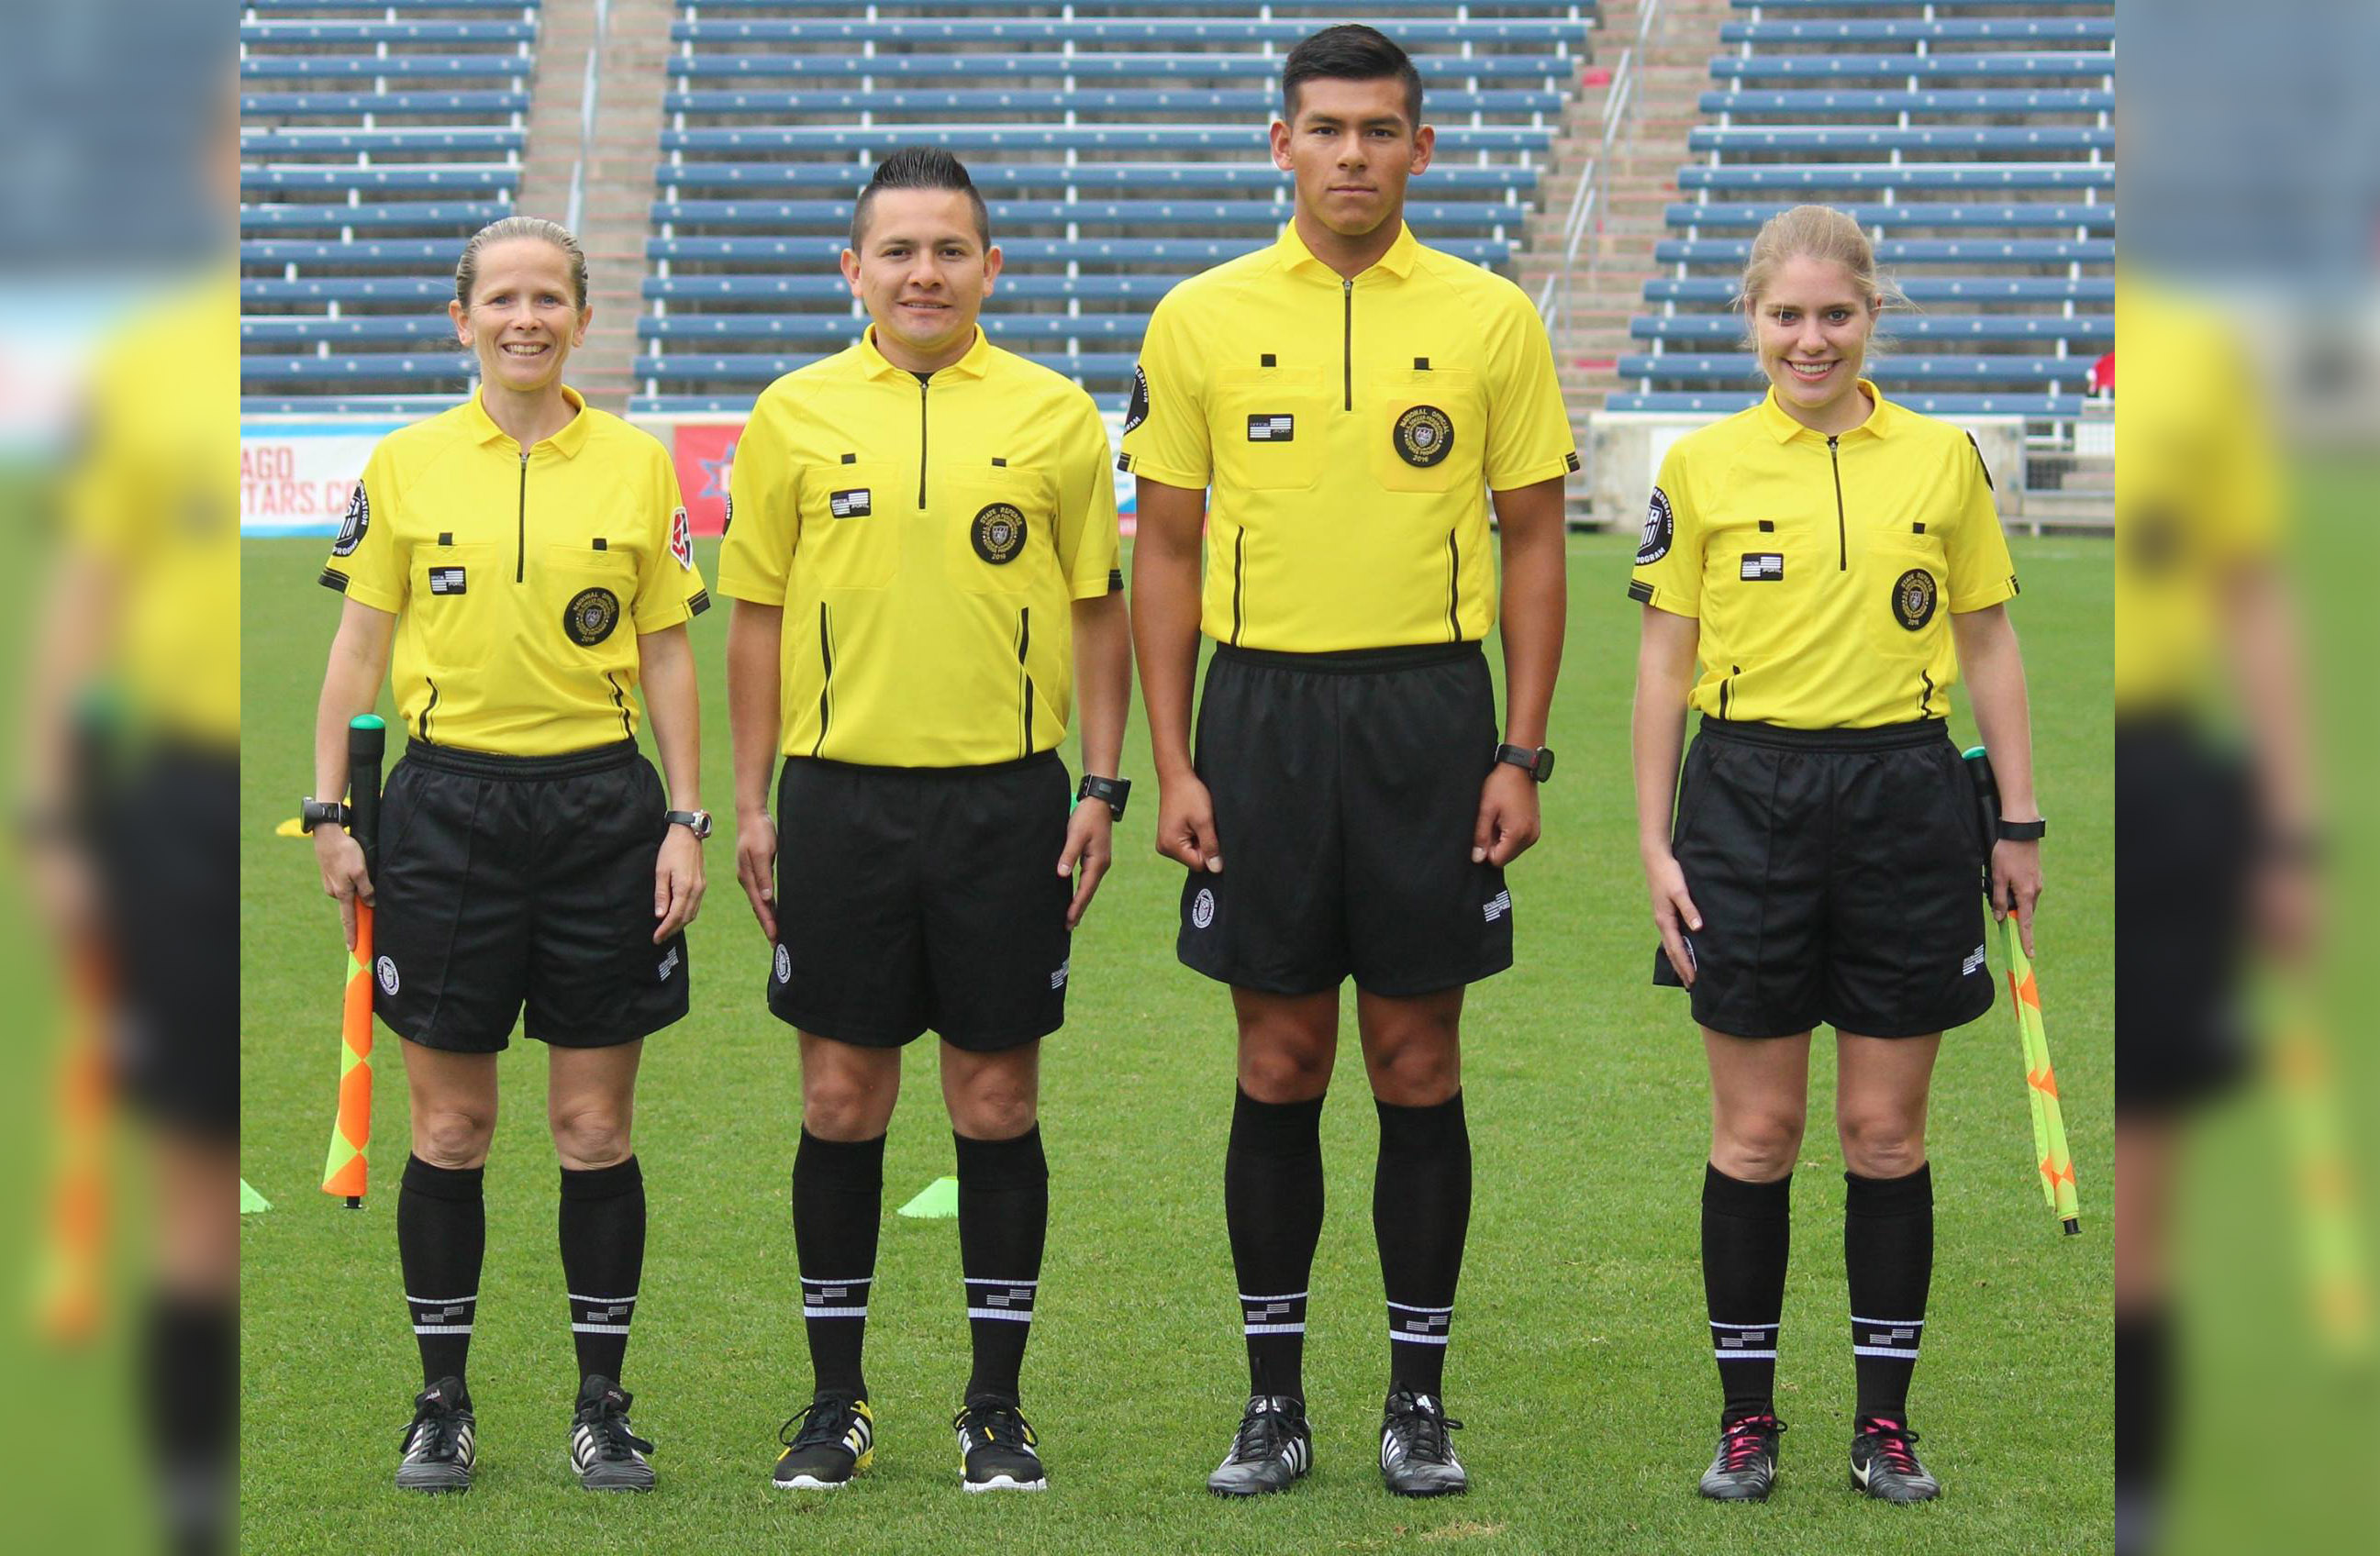 official sports soccer referee jersey